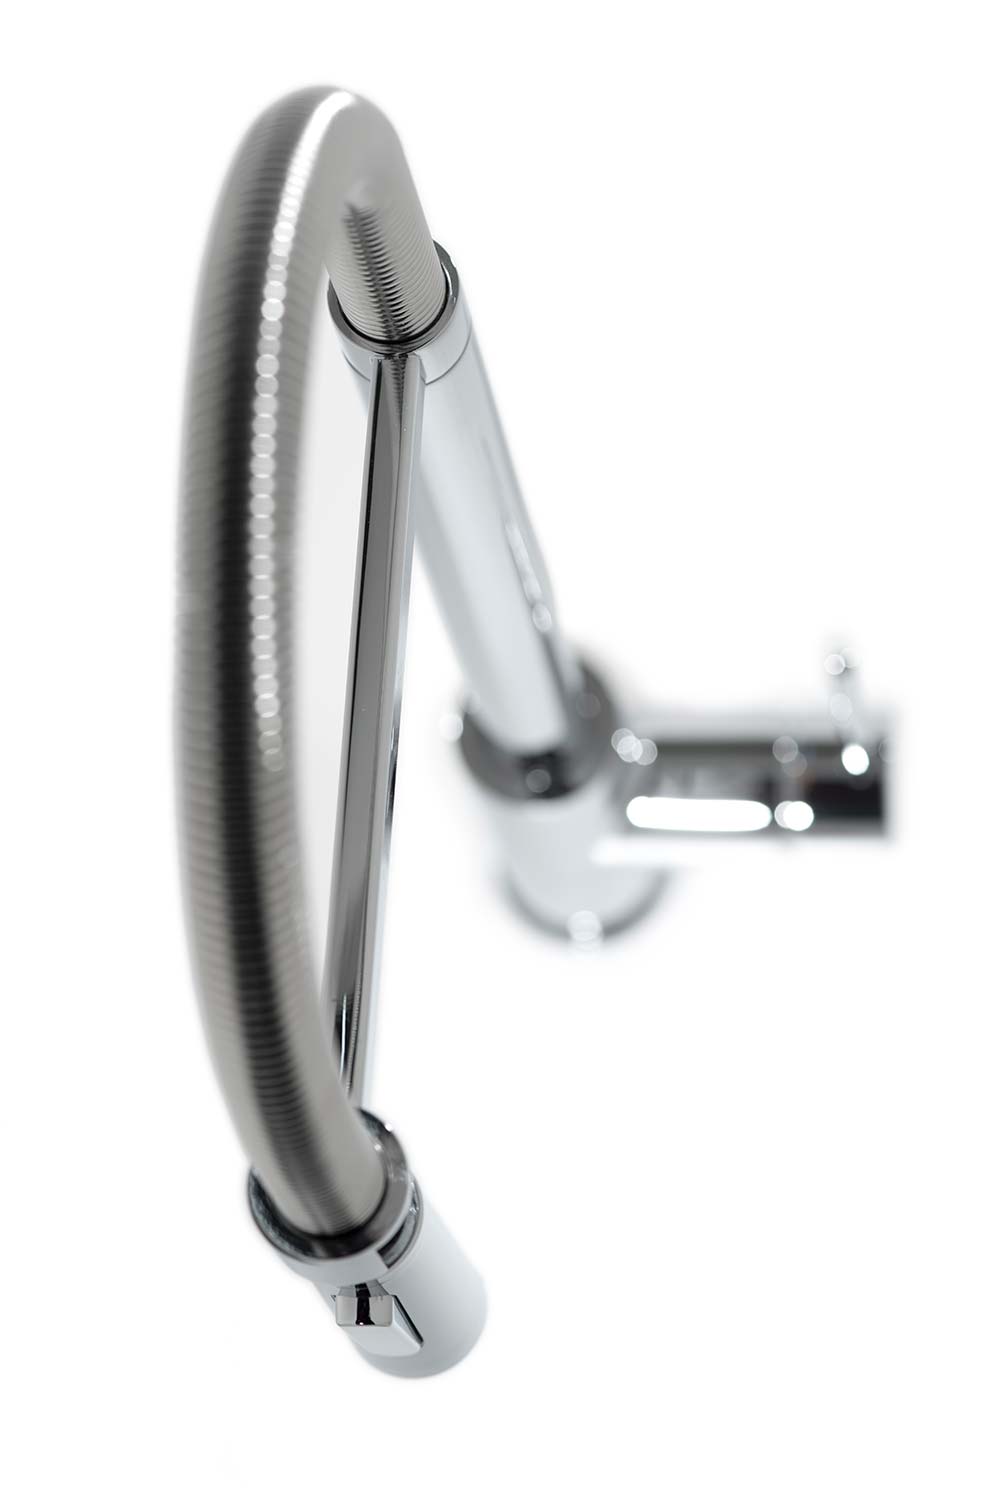 Shallow depth of field photograph of a tap from above